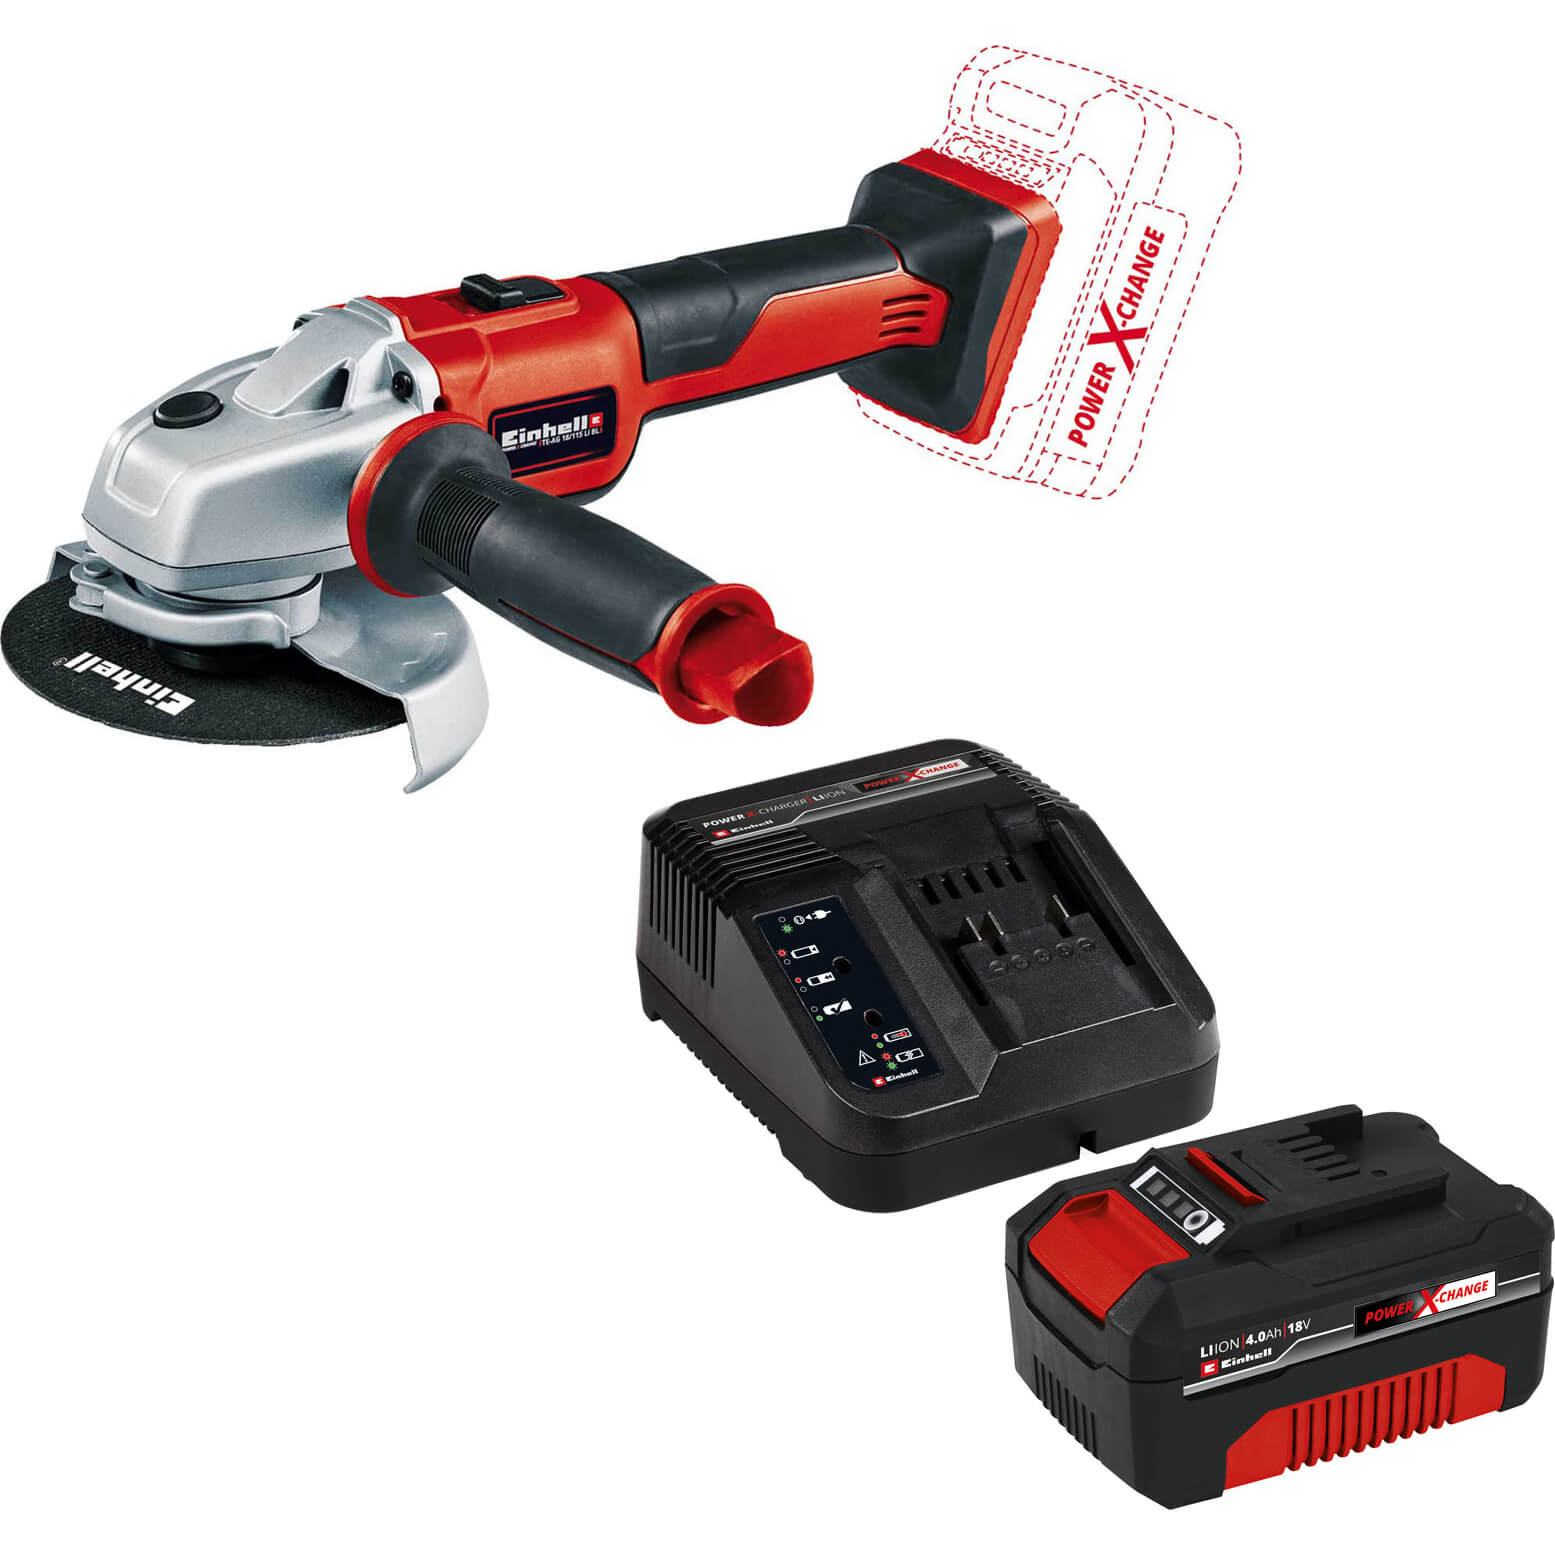 Image of Einhell AXXIO 18v Cordless Brushless Angle Grinder 115mm 1 x 4ah Li-ion Charger No Case